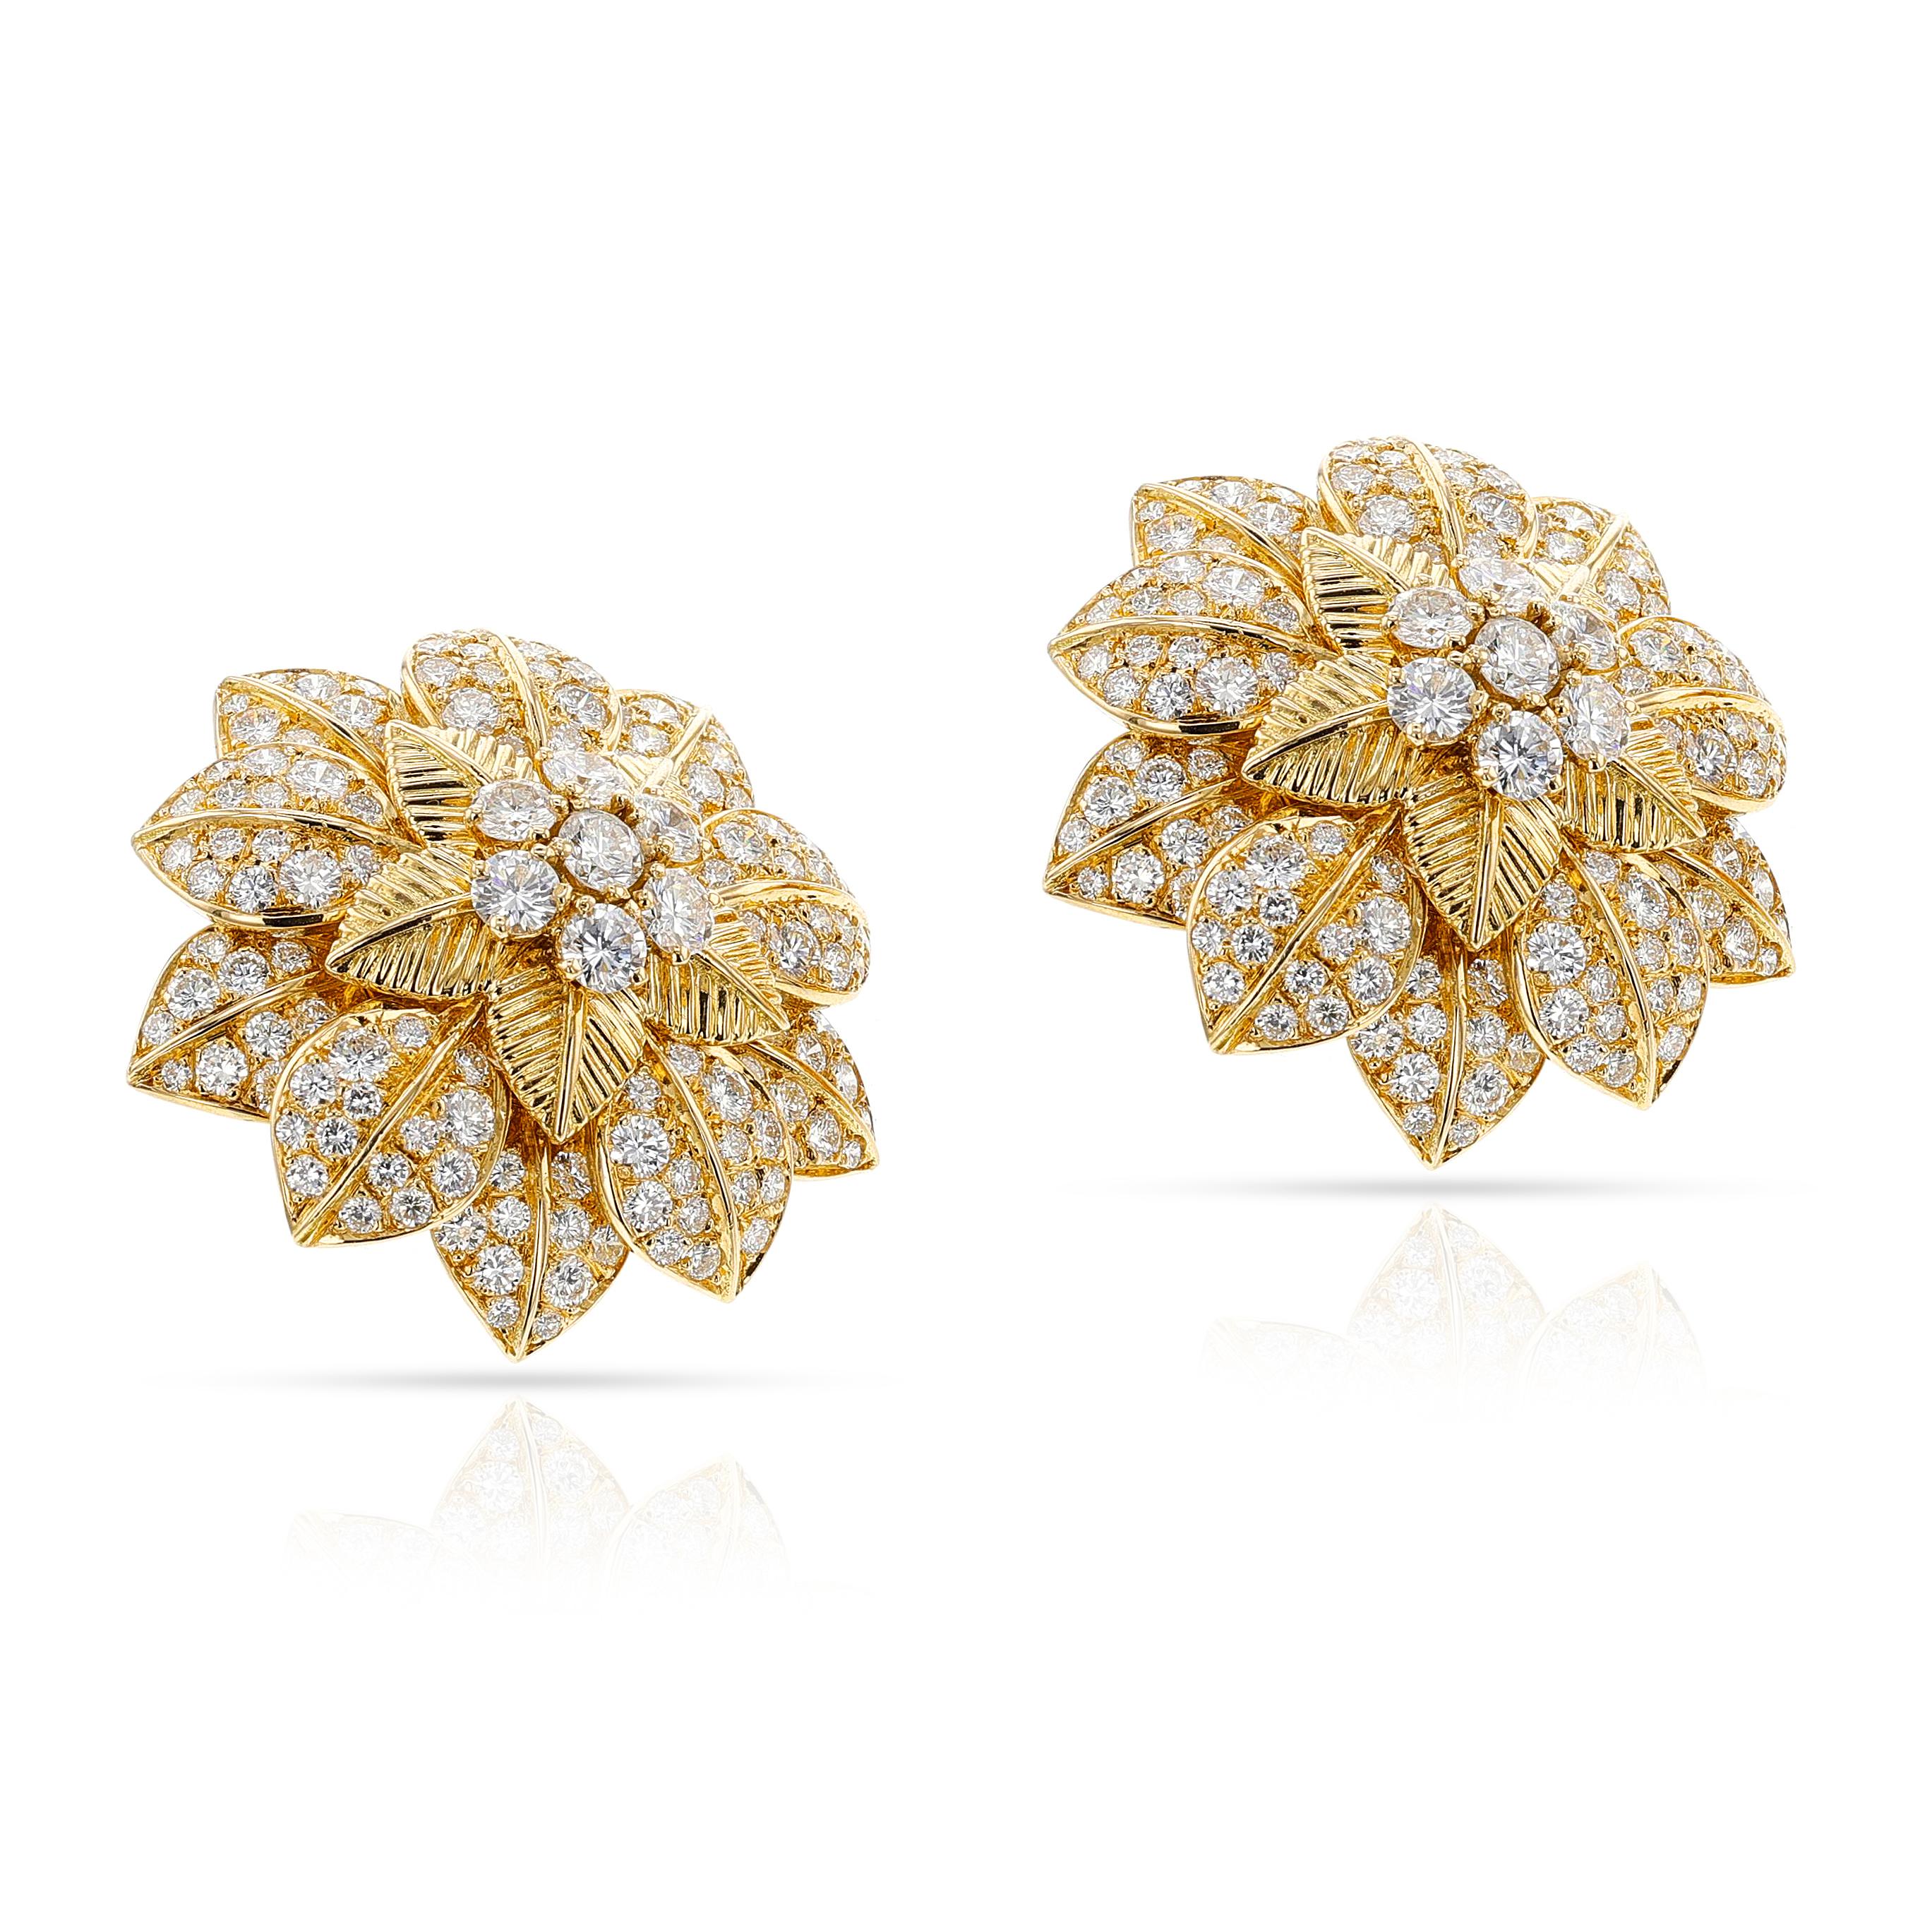 1960s Van Cleef & Arpels French Flower Diamond Petal Earrings In Excellent Condition For Sale In New York, NY